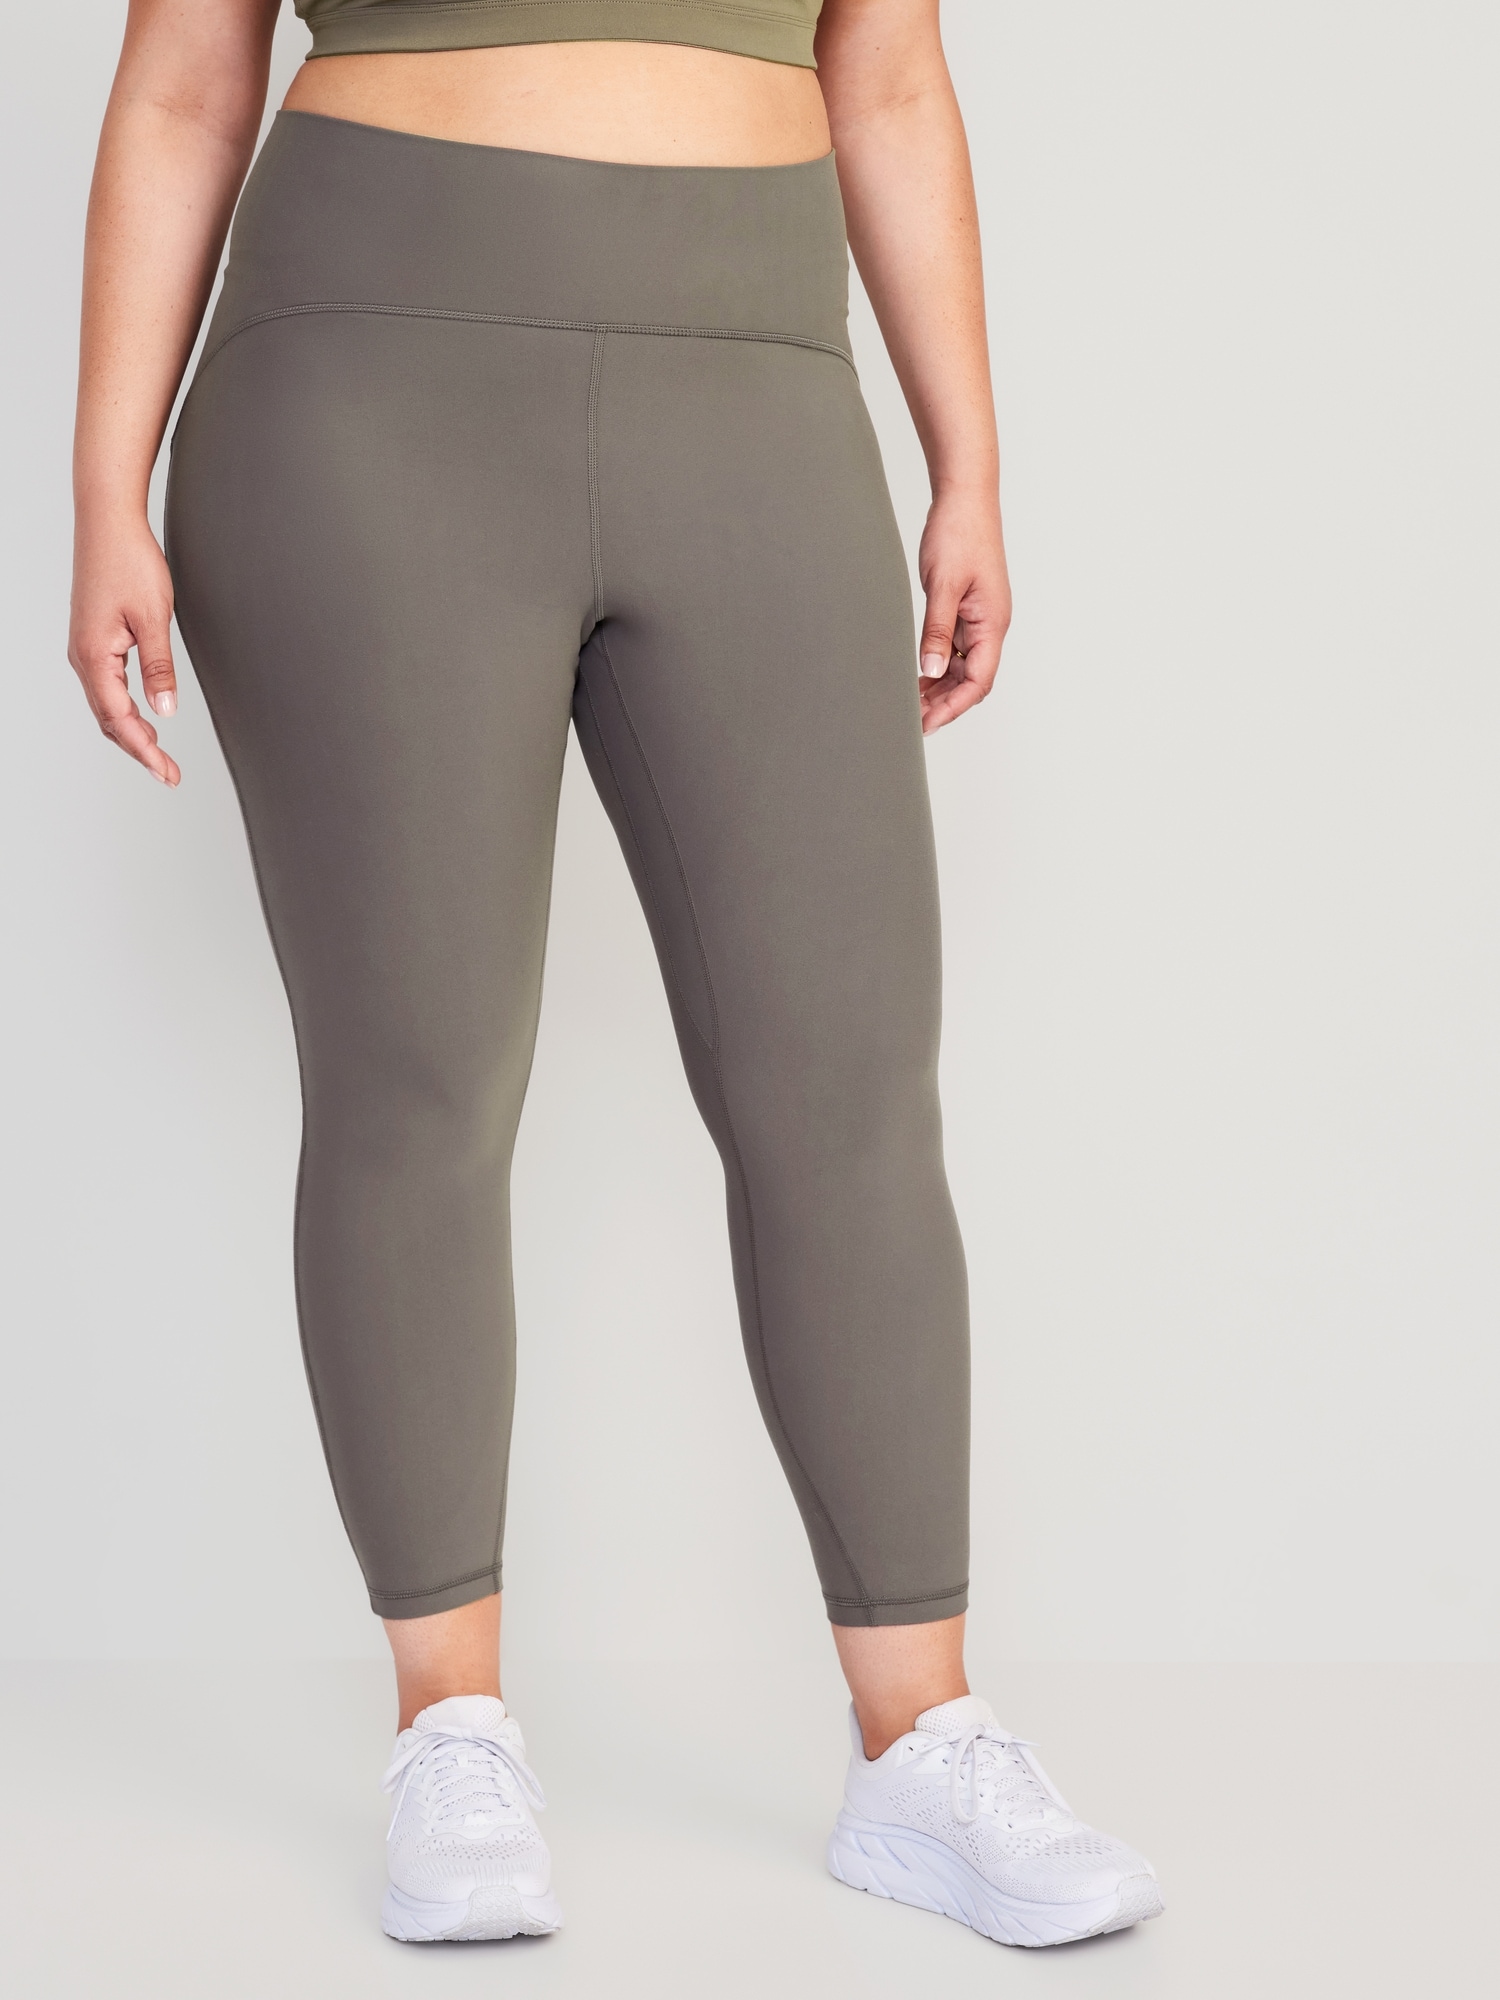 COPY - NWT Old Navy Women's Active leggings Size chart & included in pics.